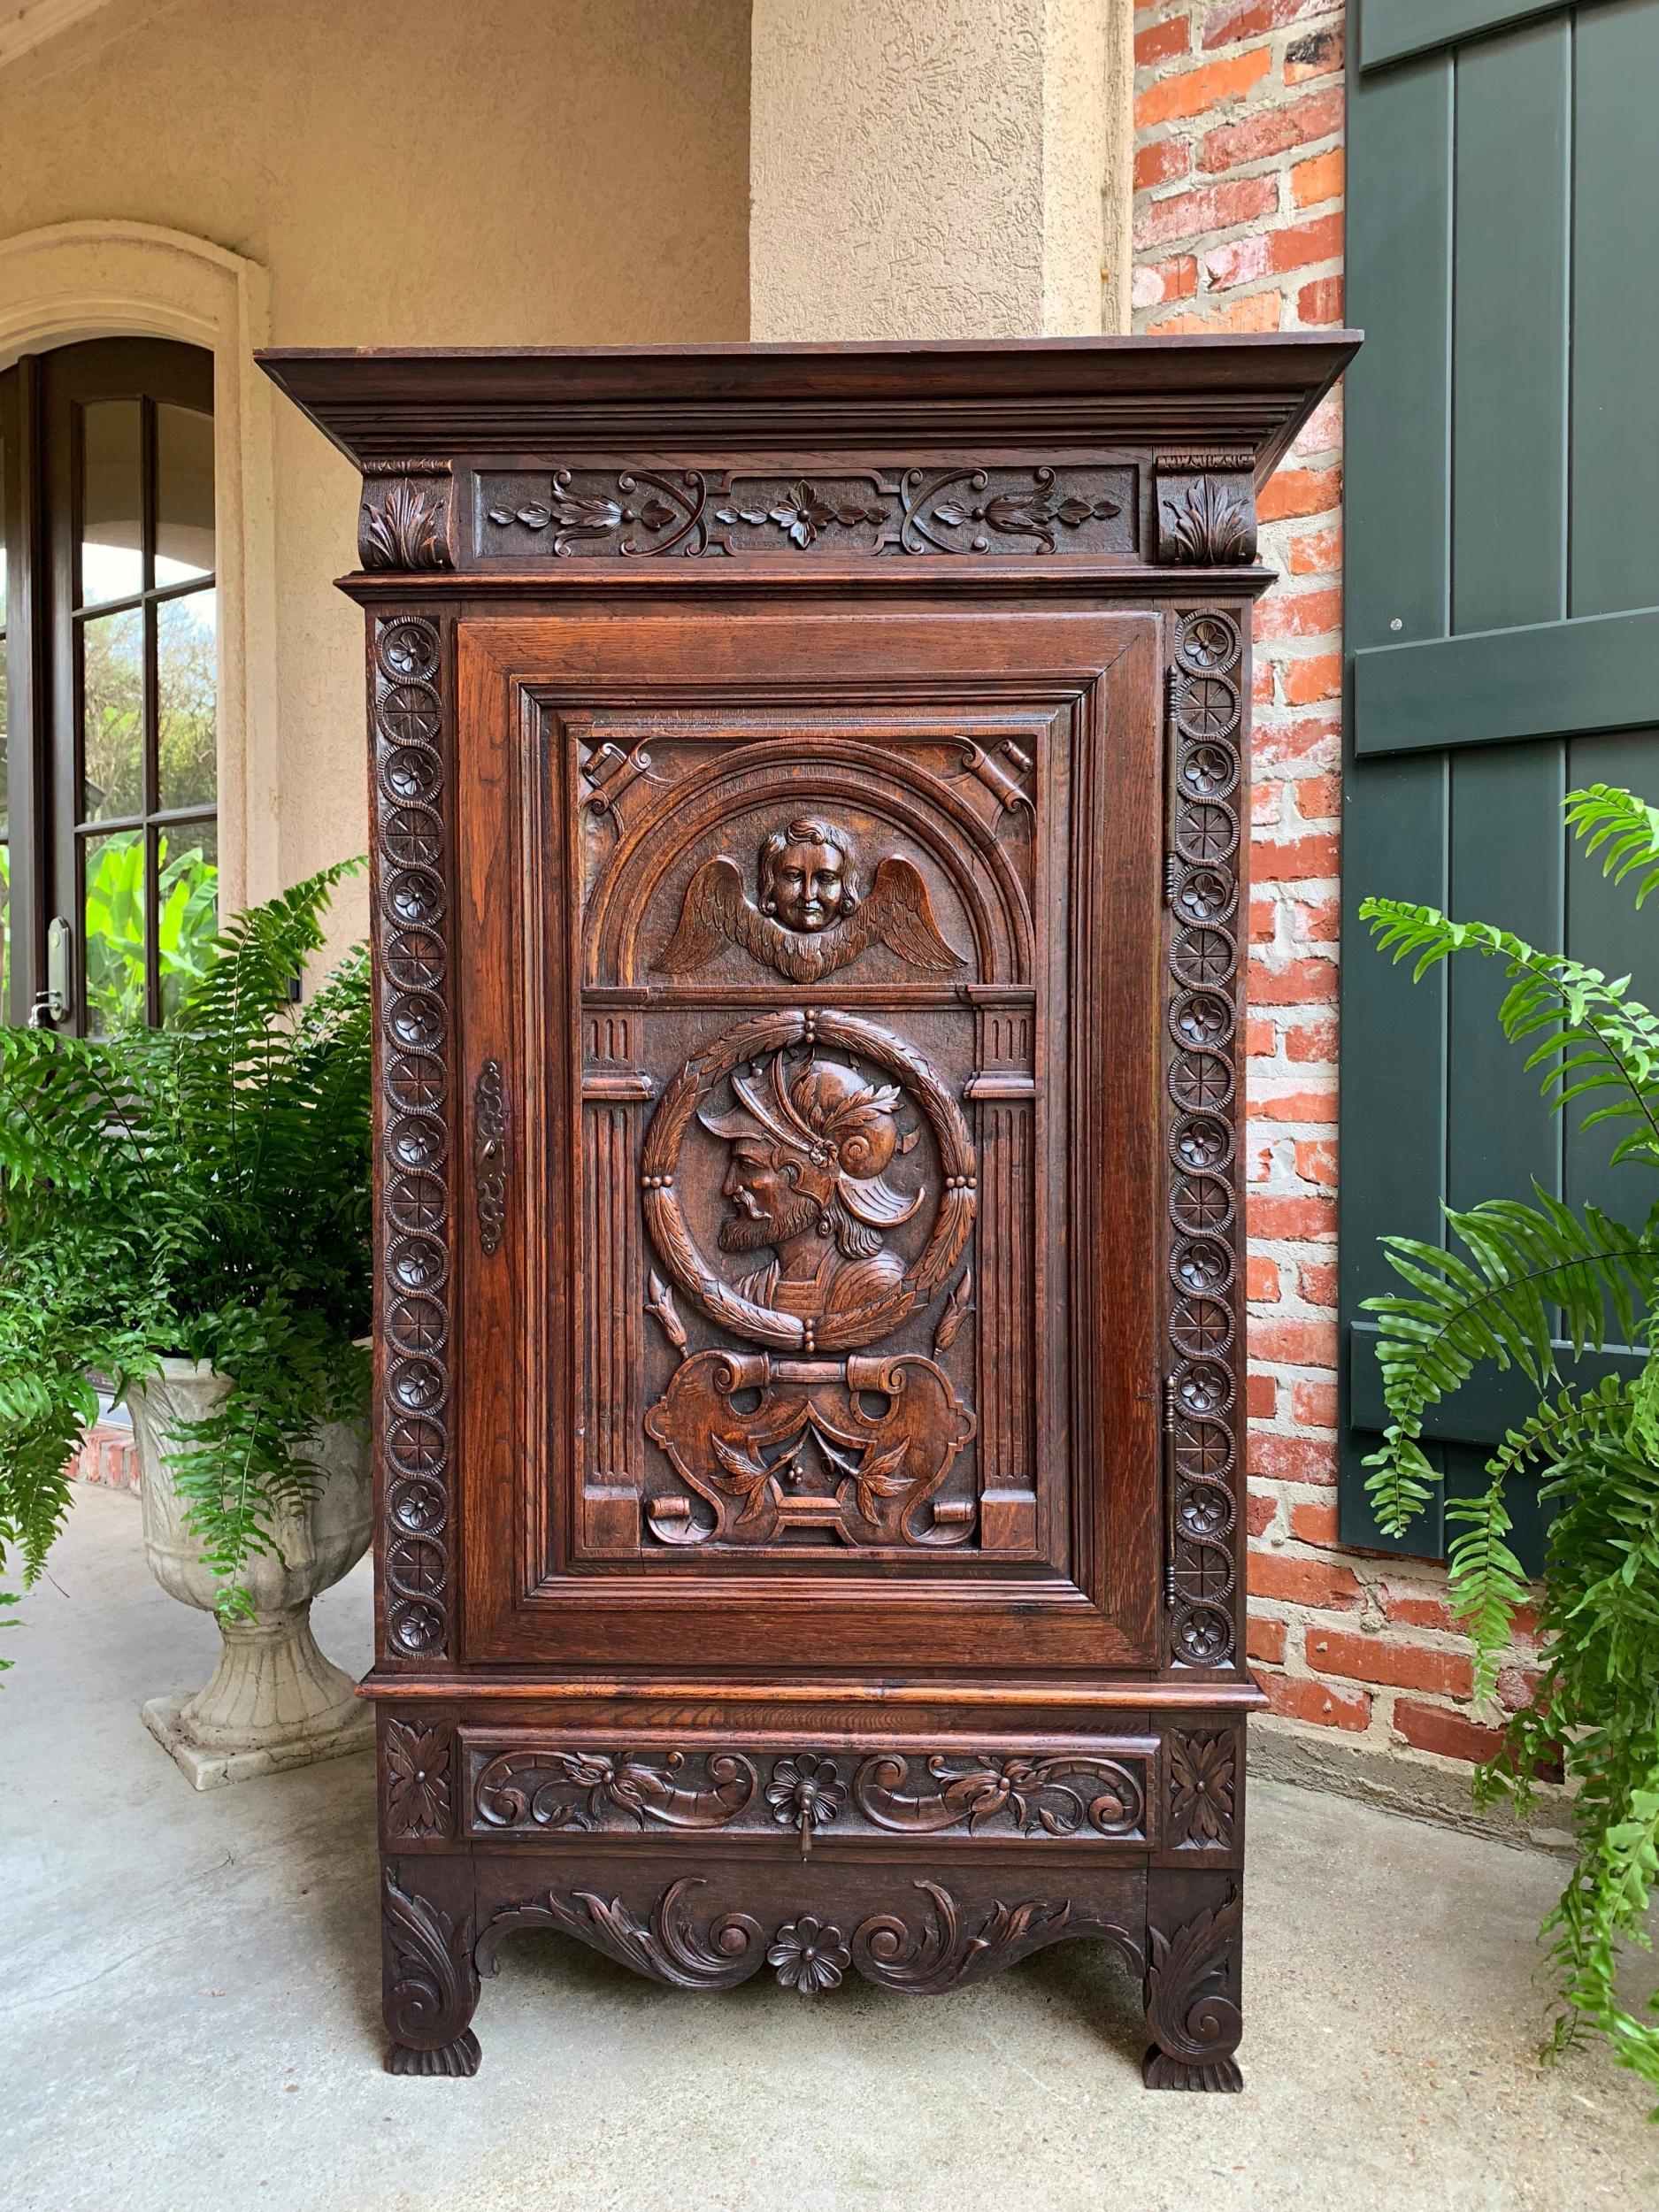 Antique French carved oak storage cabinet Renaissance Roman Centurion 19th cent

~Direct from the Brittany region of France, an ornately hand carved antique French oak cabinet~
~These cabinets are one of our most requested antiques, as they have so